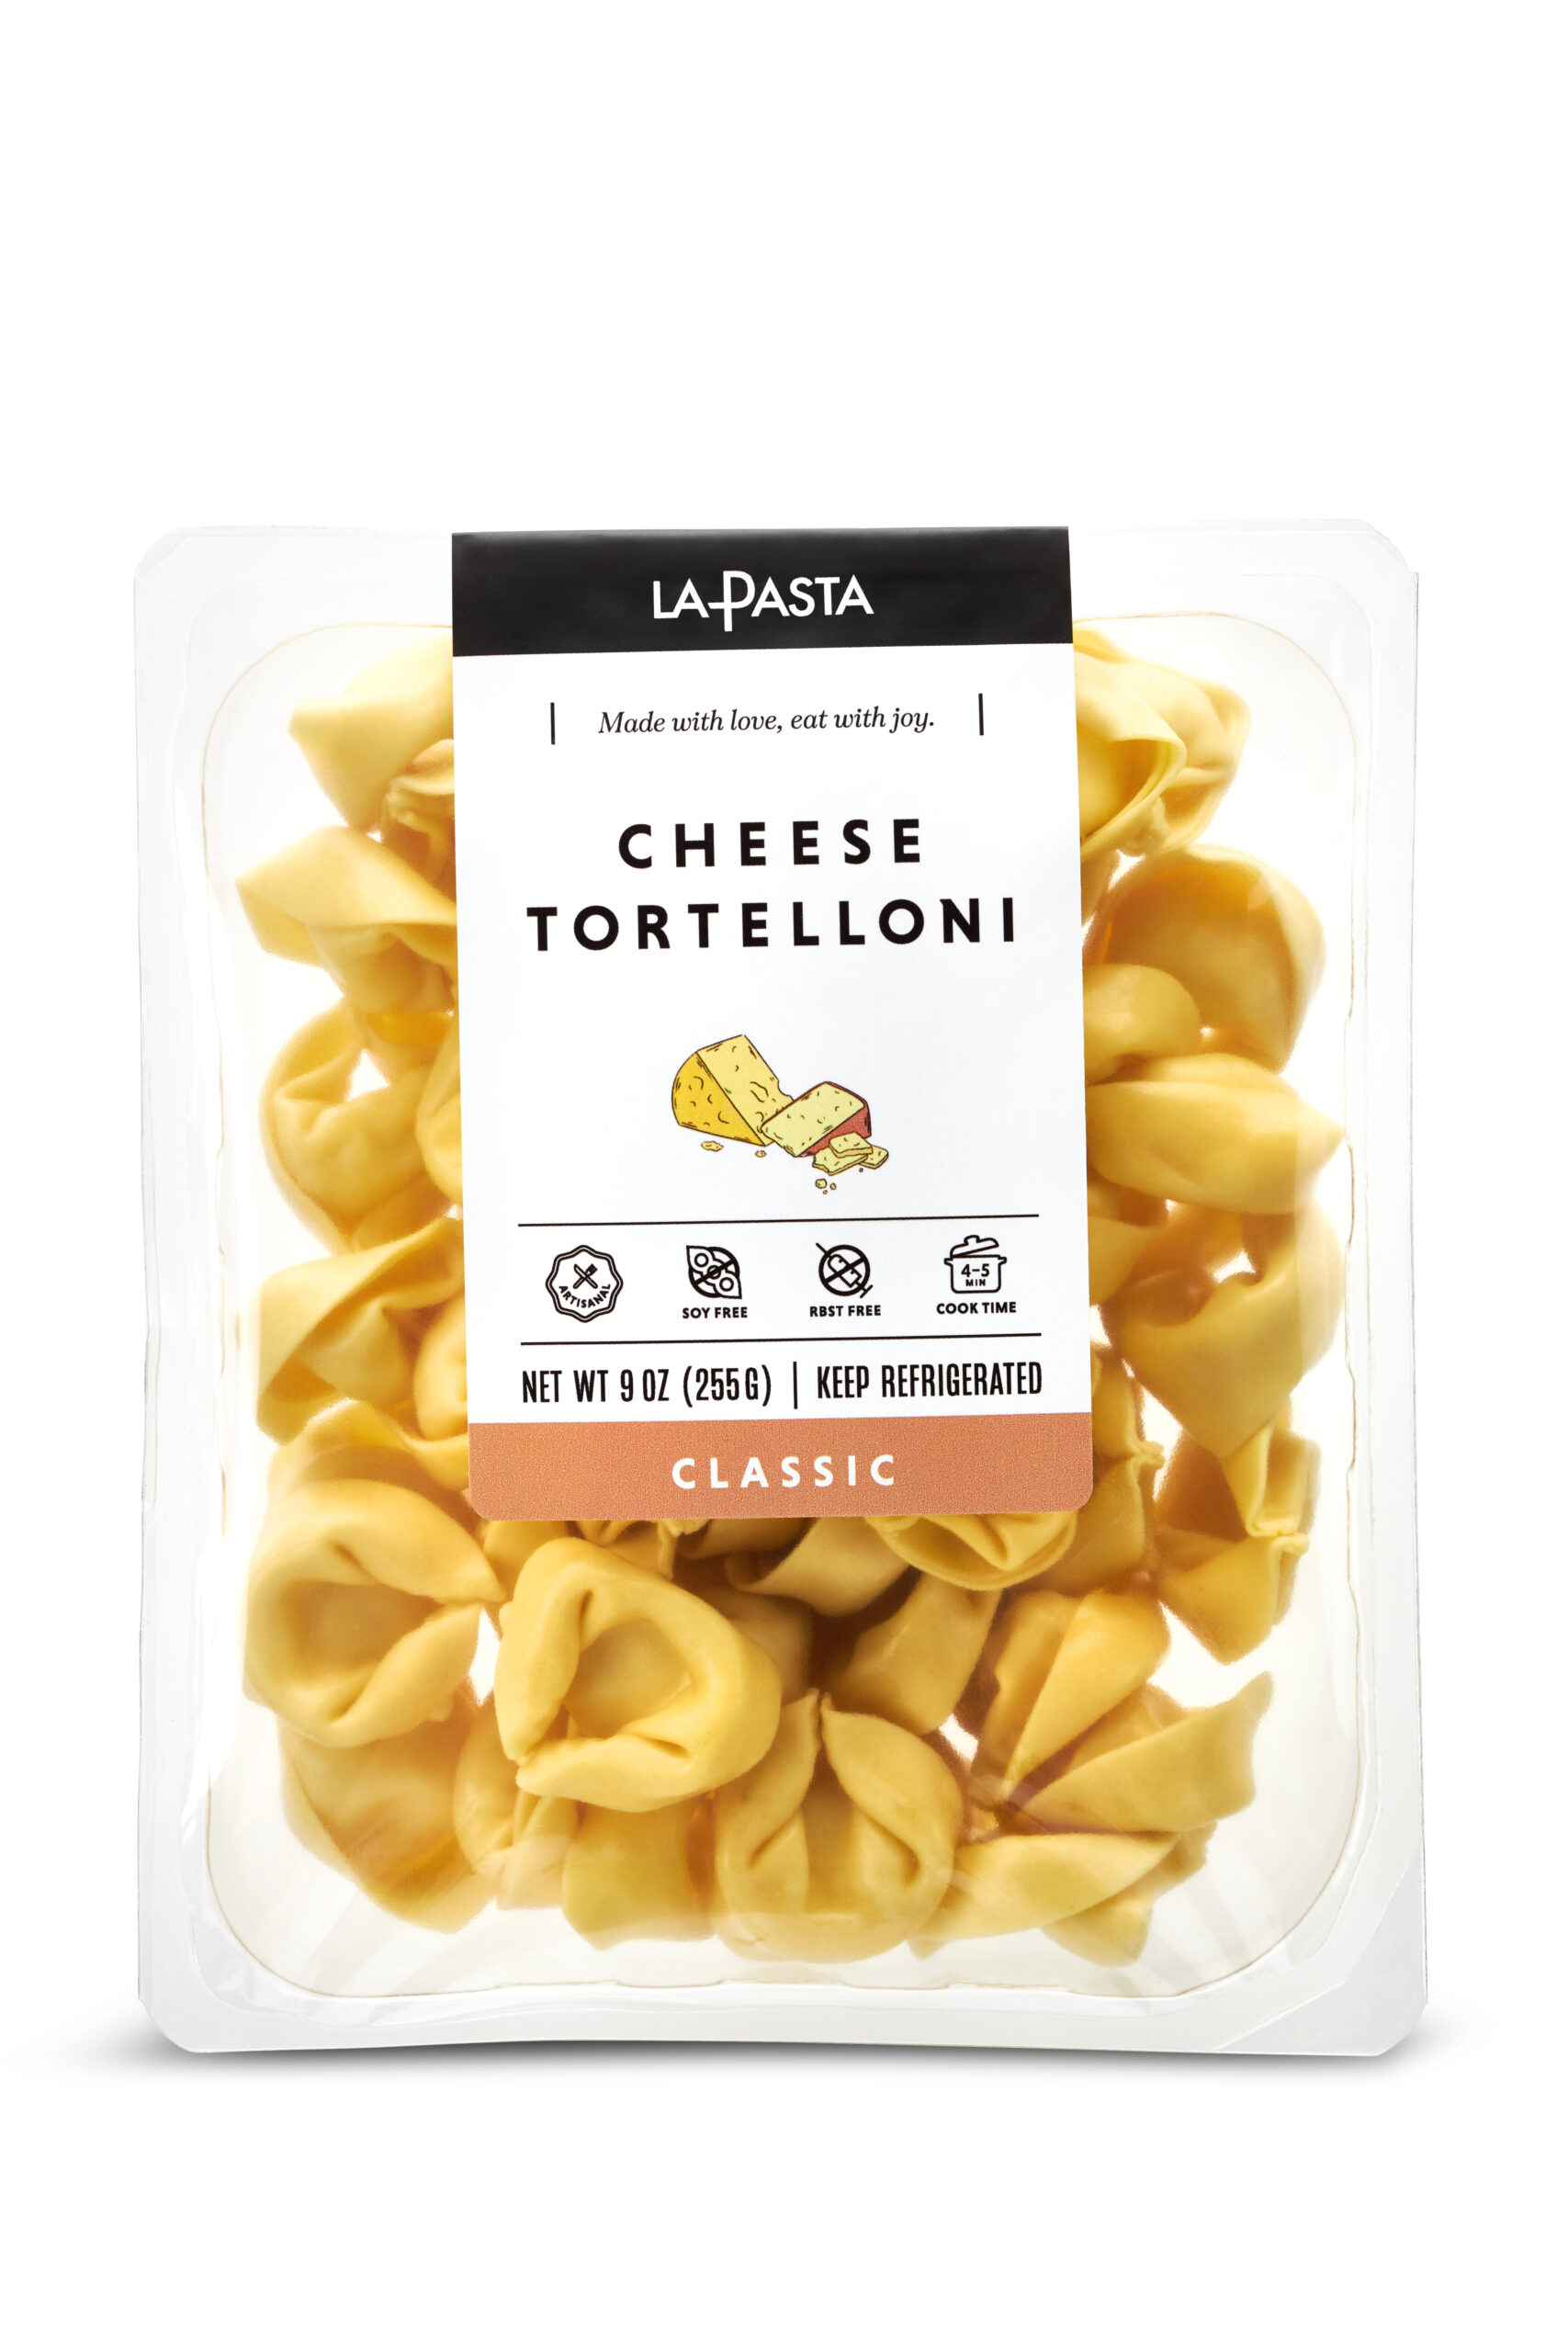 A package of cheese tortelloni is shown.